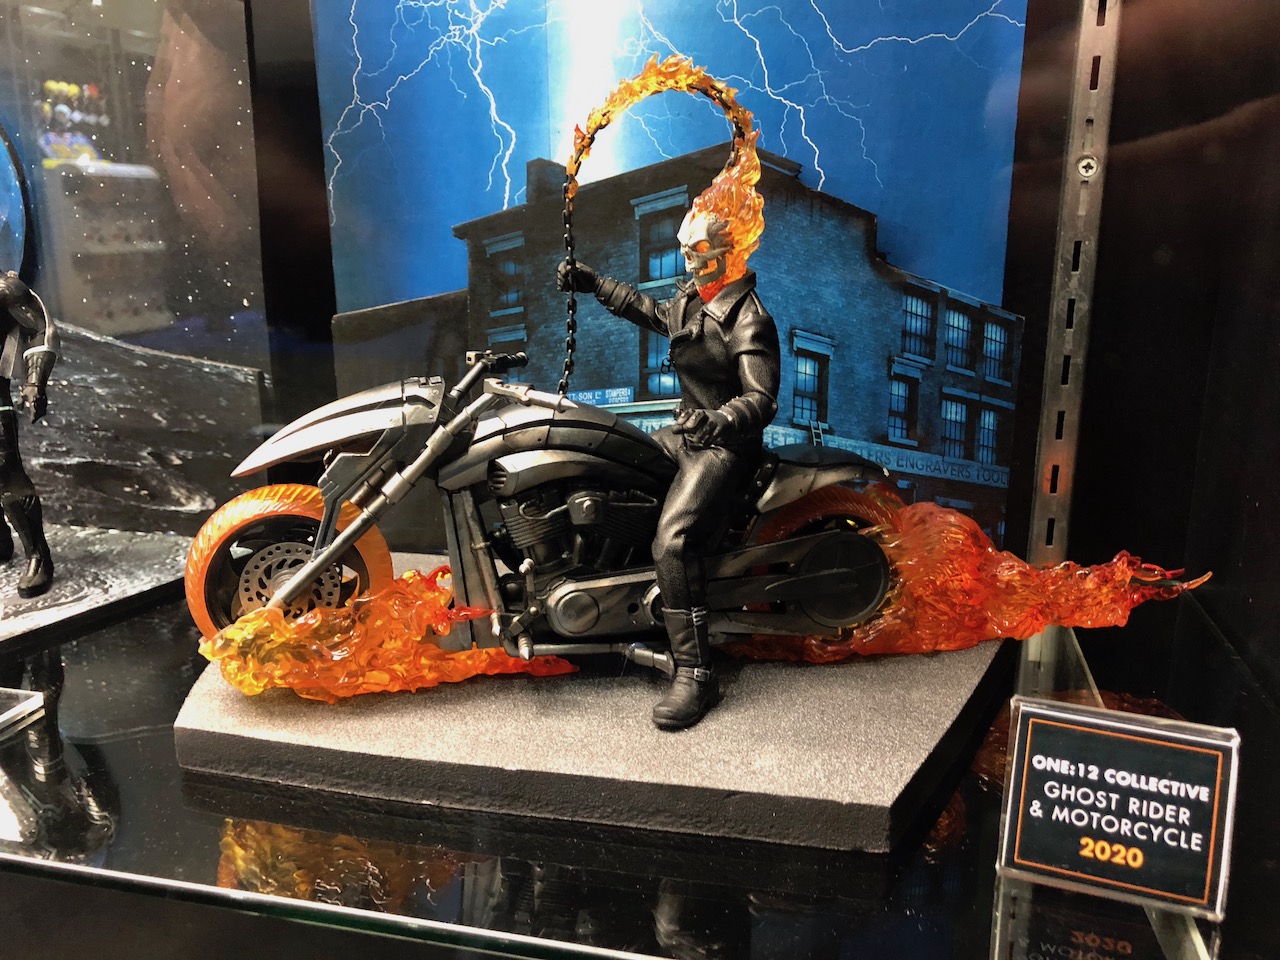 One:12 Collective Ghost Rider & Hell Cycle Set